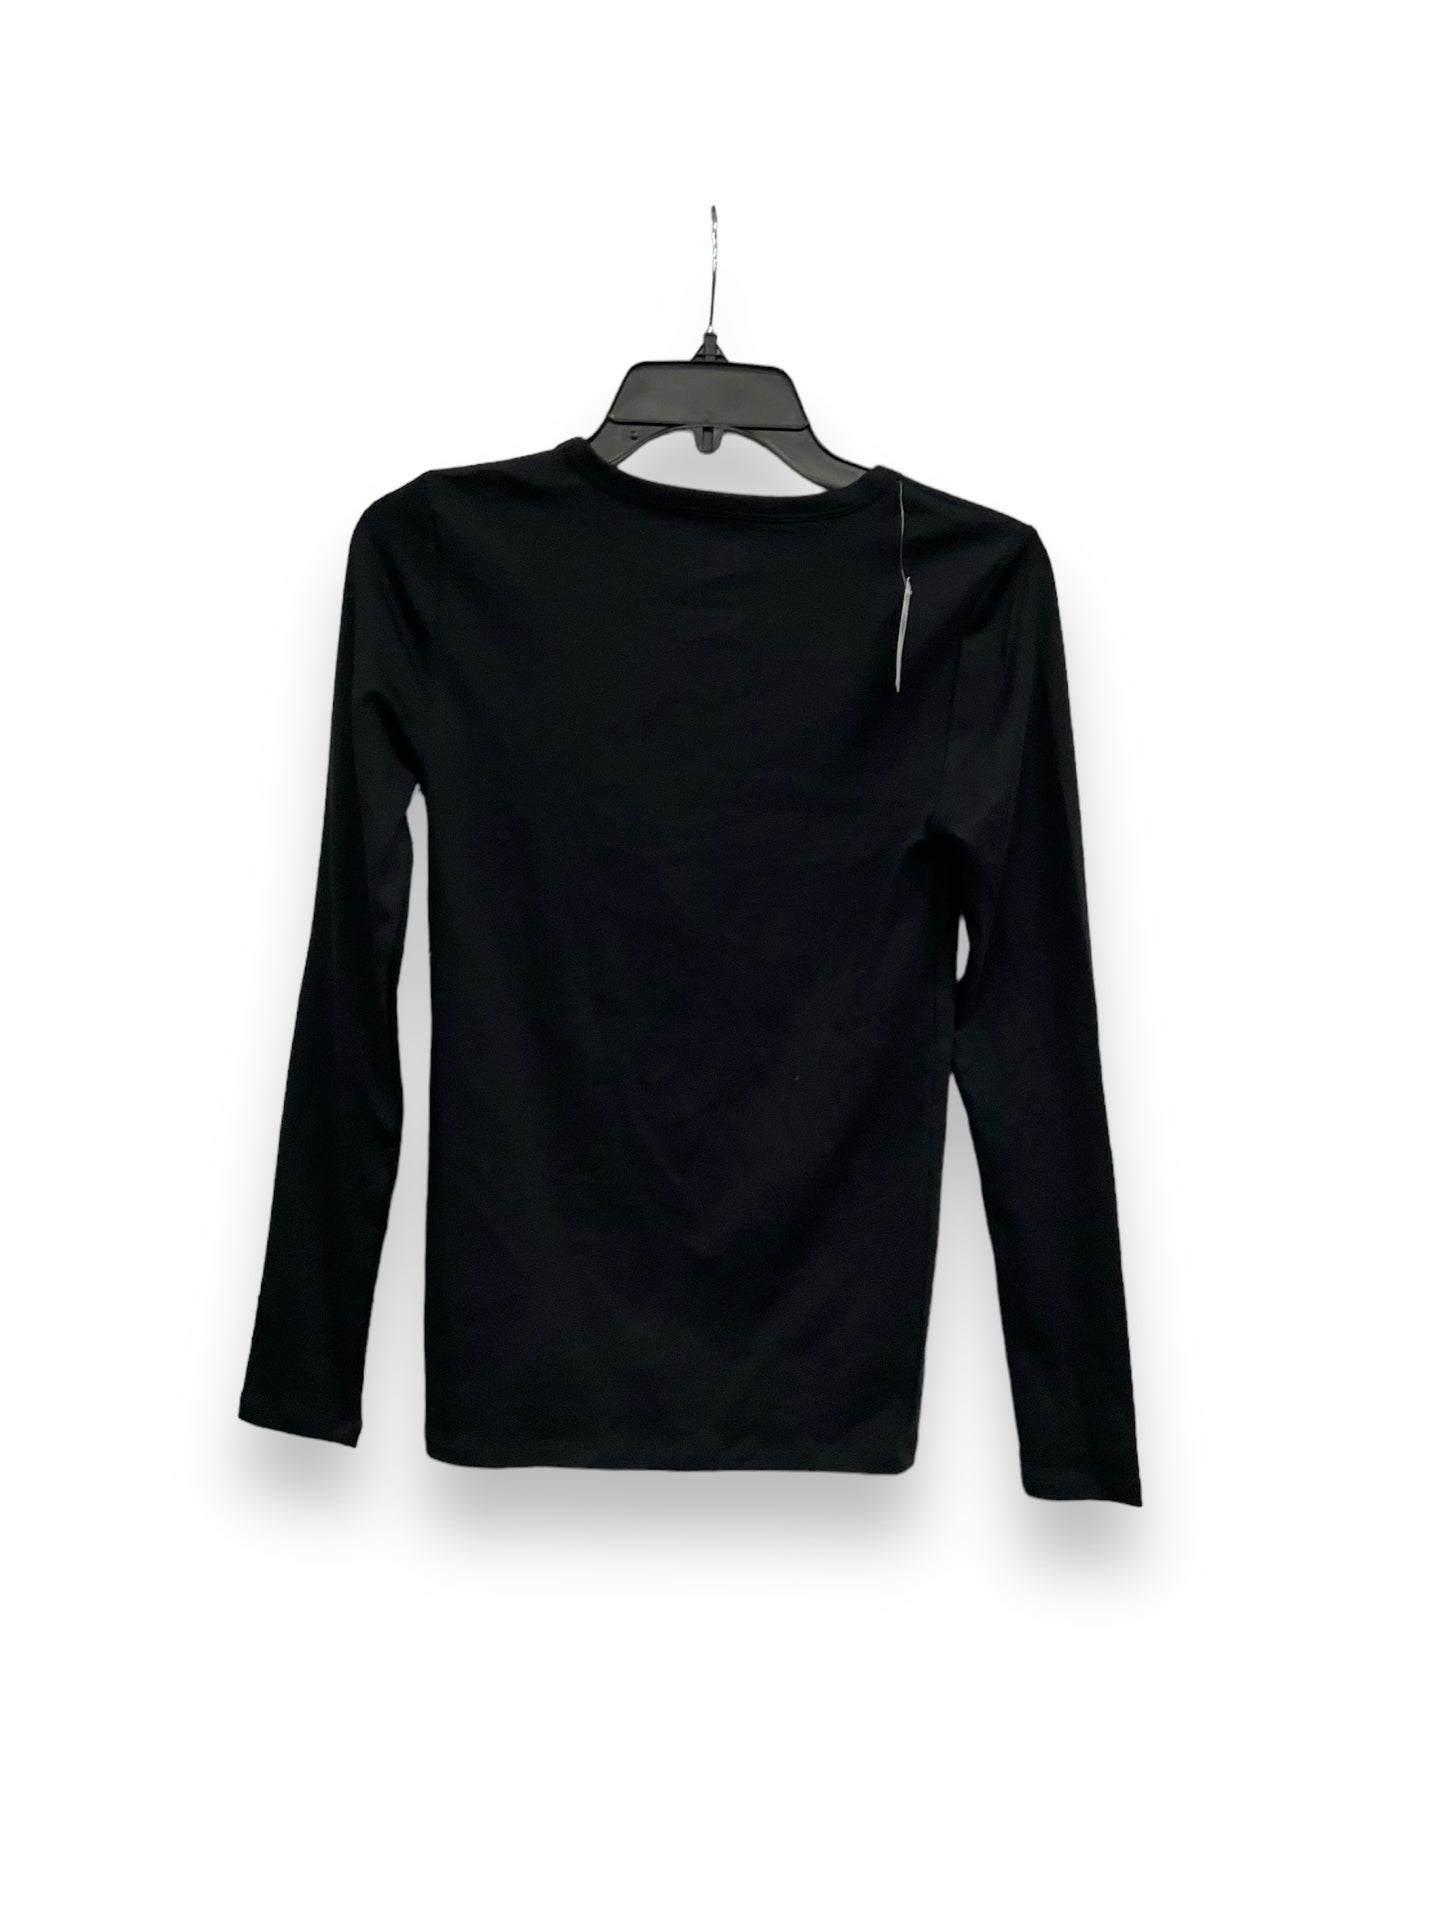 Top Long Sleeve Basic By Gap  Size: S